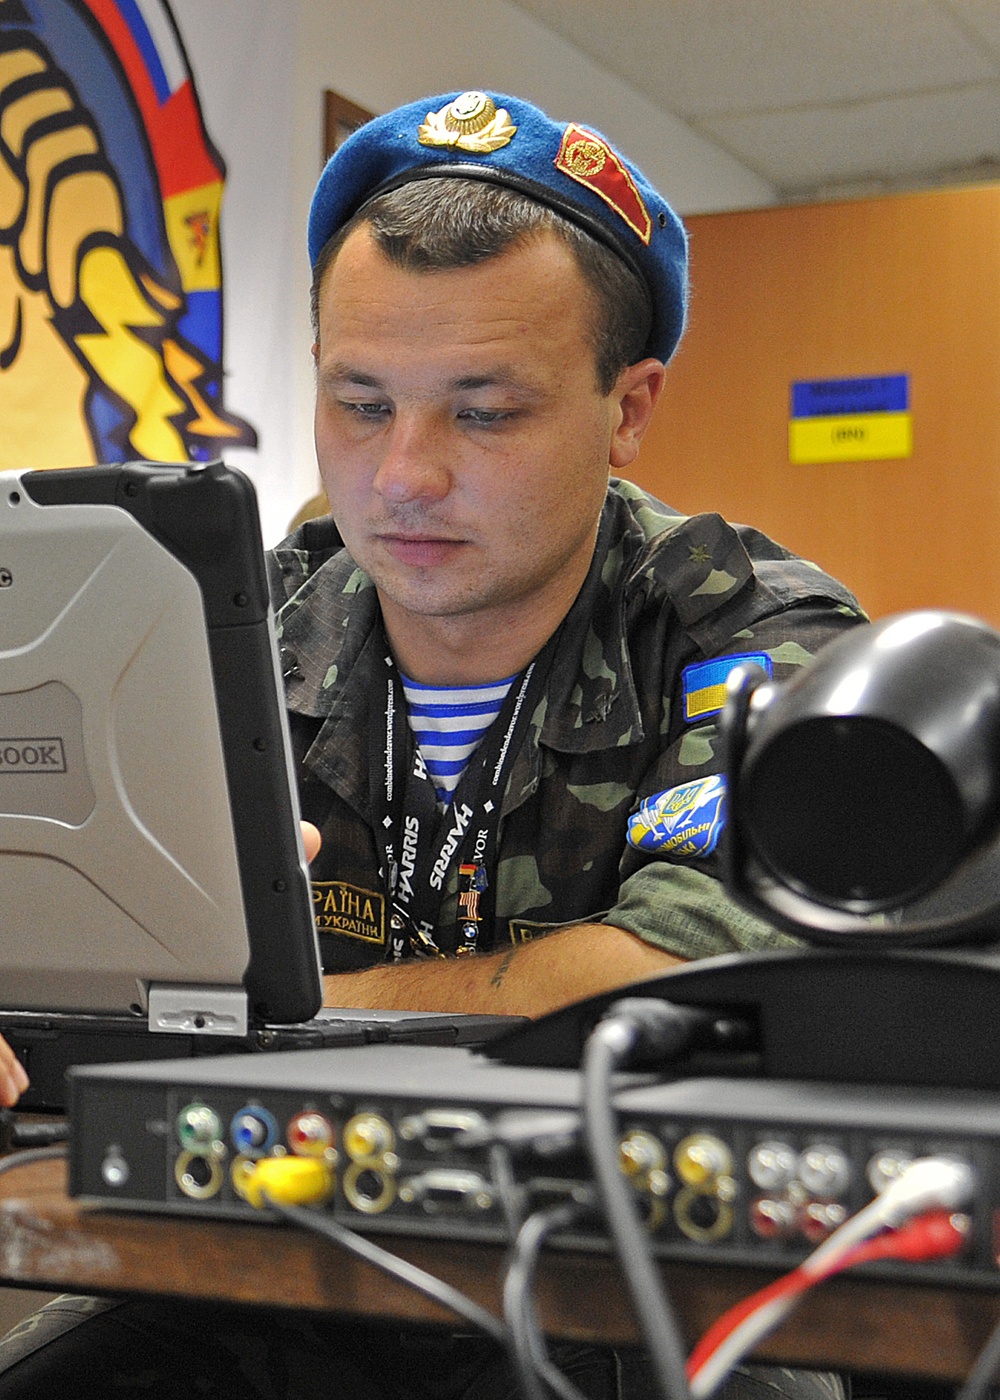 Communications capabilities of Ukraine military improve during Combined Endeavor 2011